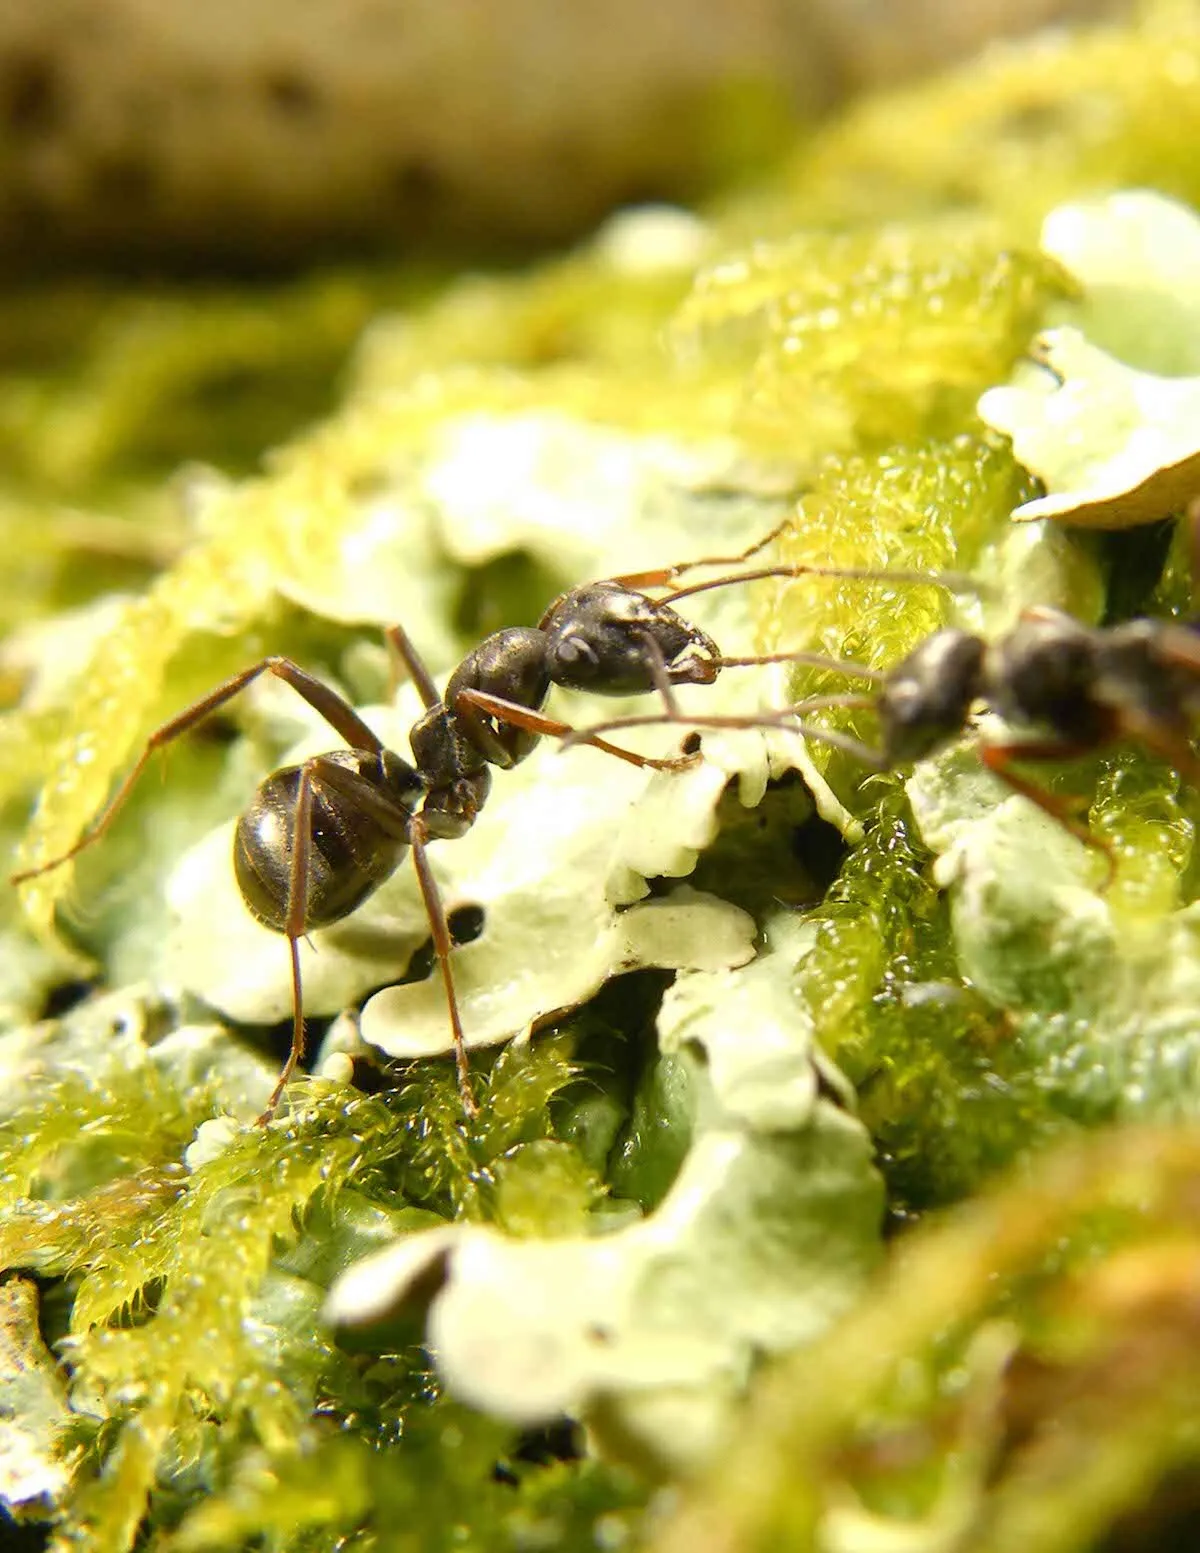 A Formica fusca ant on a green leaf